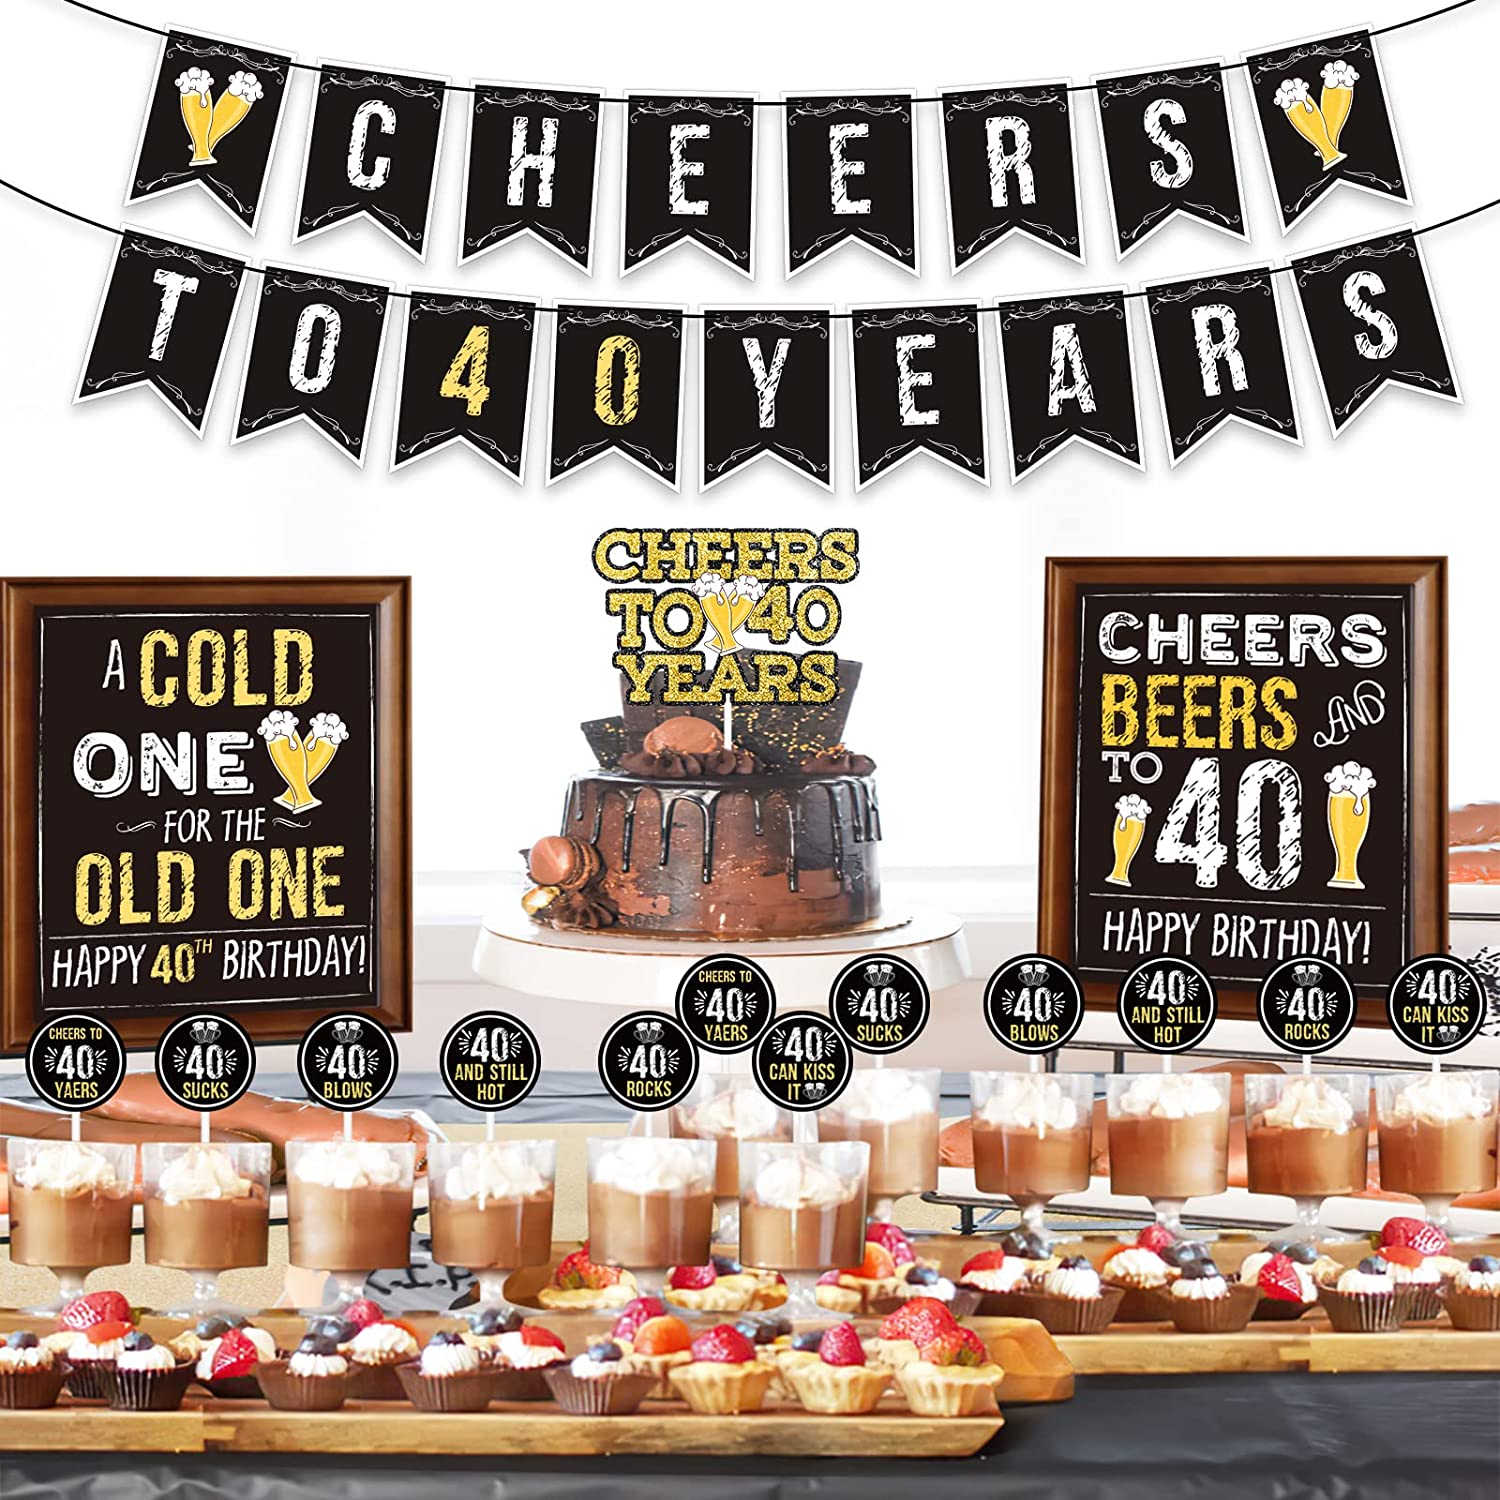 Cheers to 40 Years Birthday Decoration for Men, 40th Birthday Party Decorations Cheers & Beers to 40 Years Banner Cake Topper Birthday Sign for 40th Birthday Gifts 40th Anniversary Party Supplies –